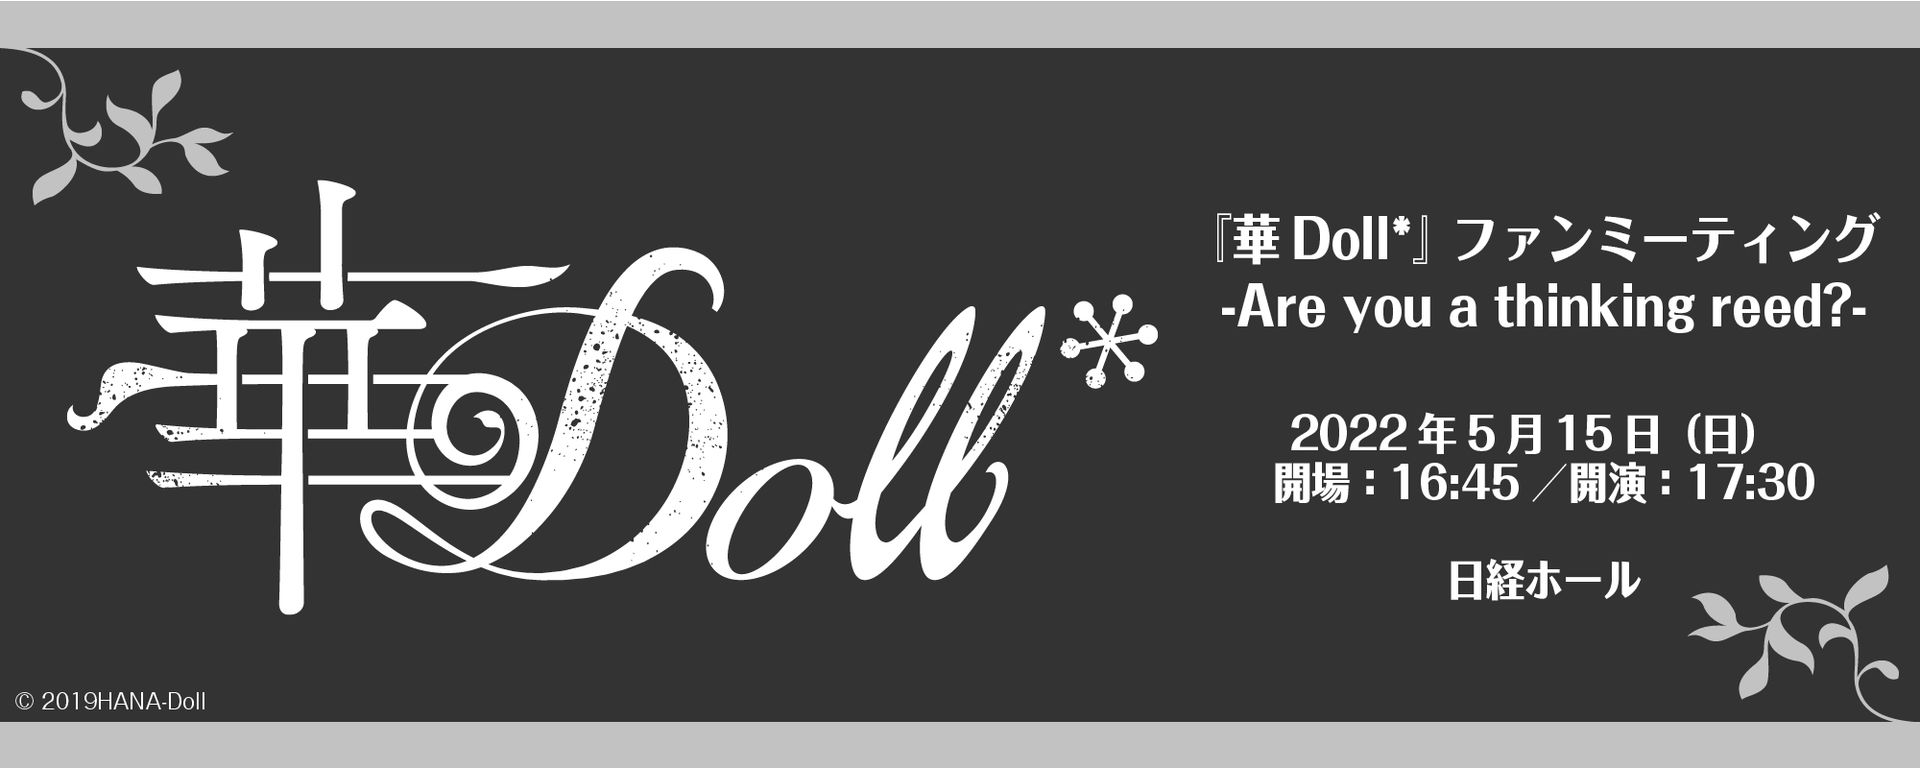 [Streaming+] “HANA Doll*“ Fan meeting ーAre you a thinking reed?ー